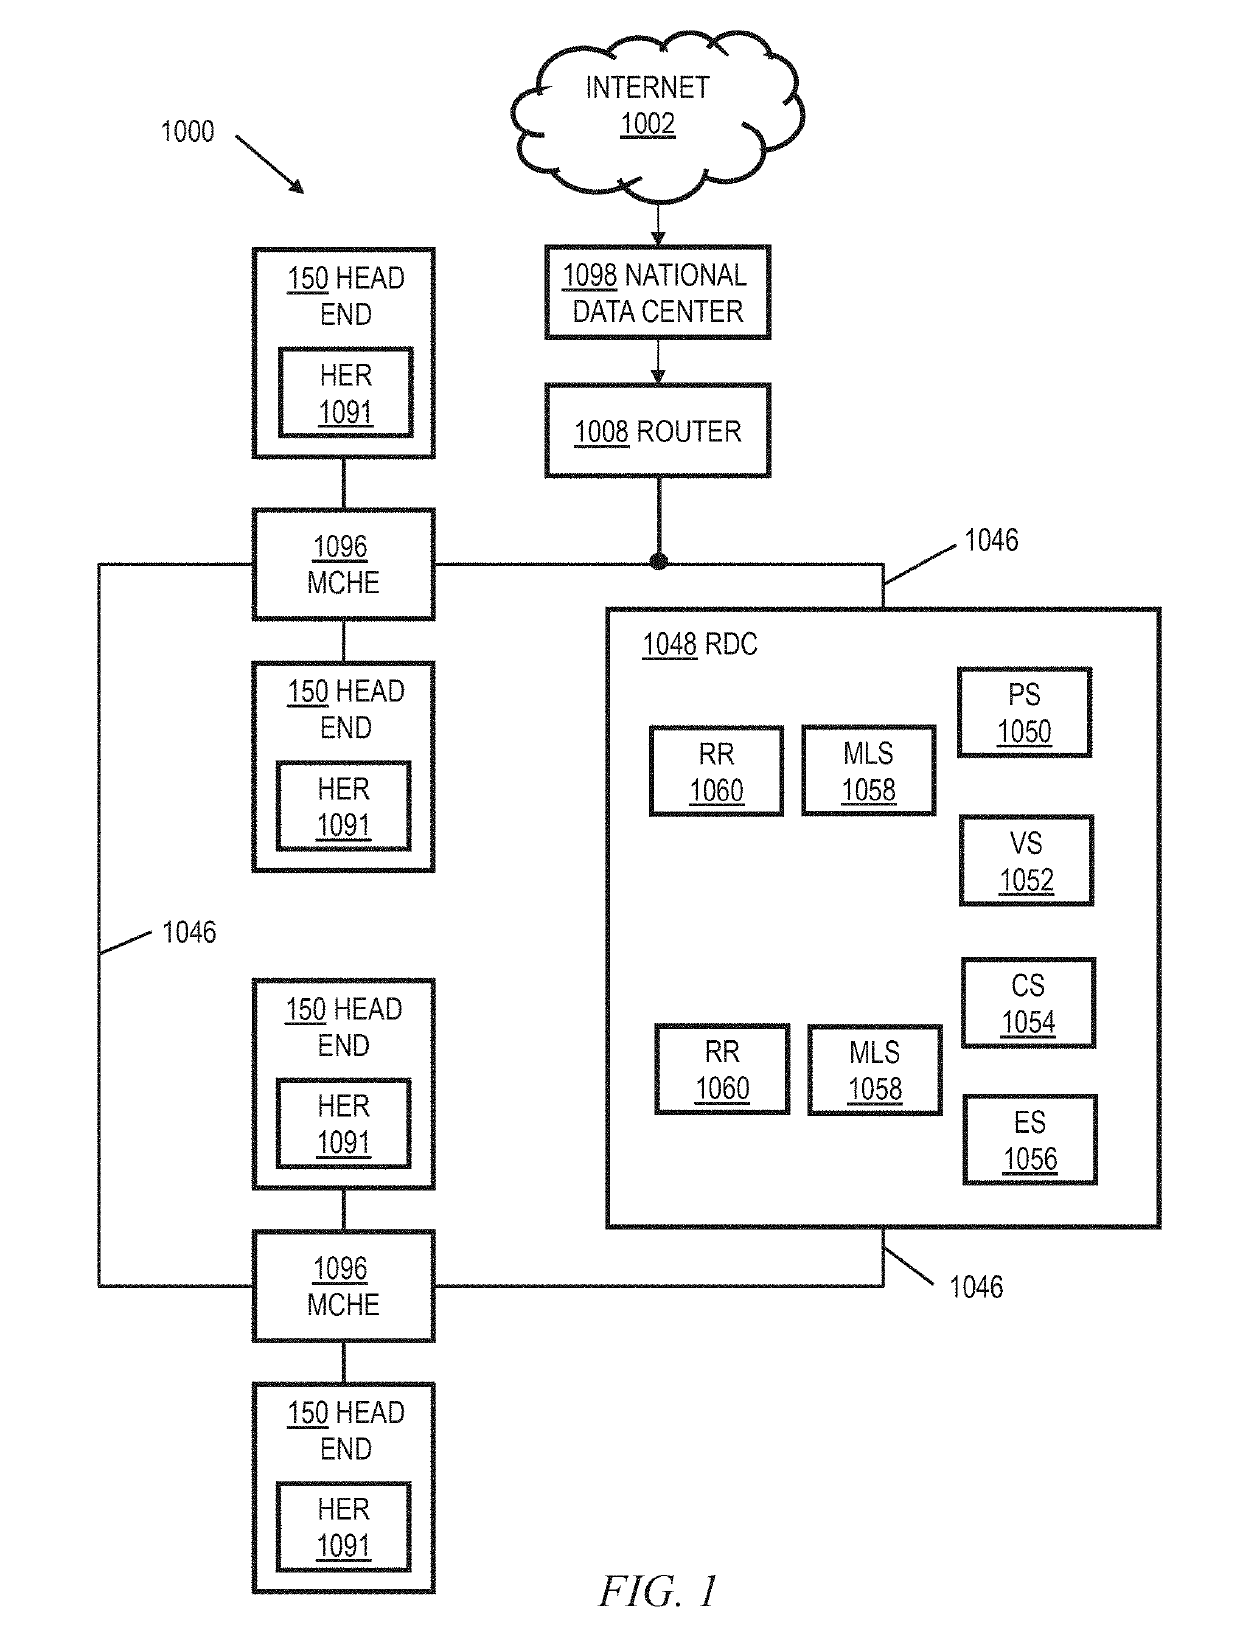 Bi-directional speed test method and system for customer premises equipment (CPE) devices